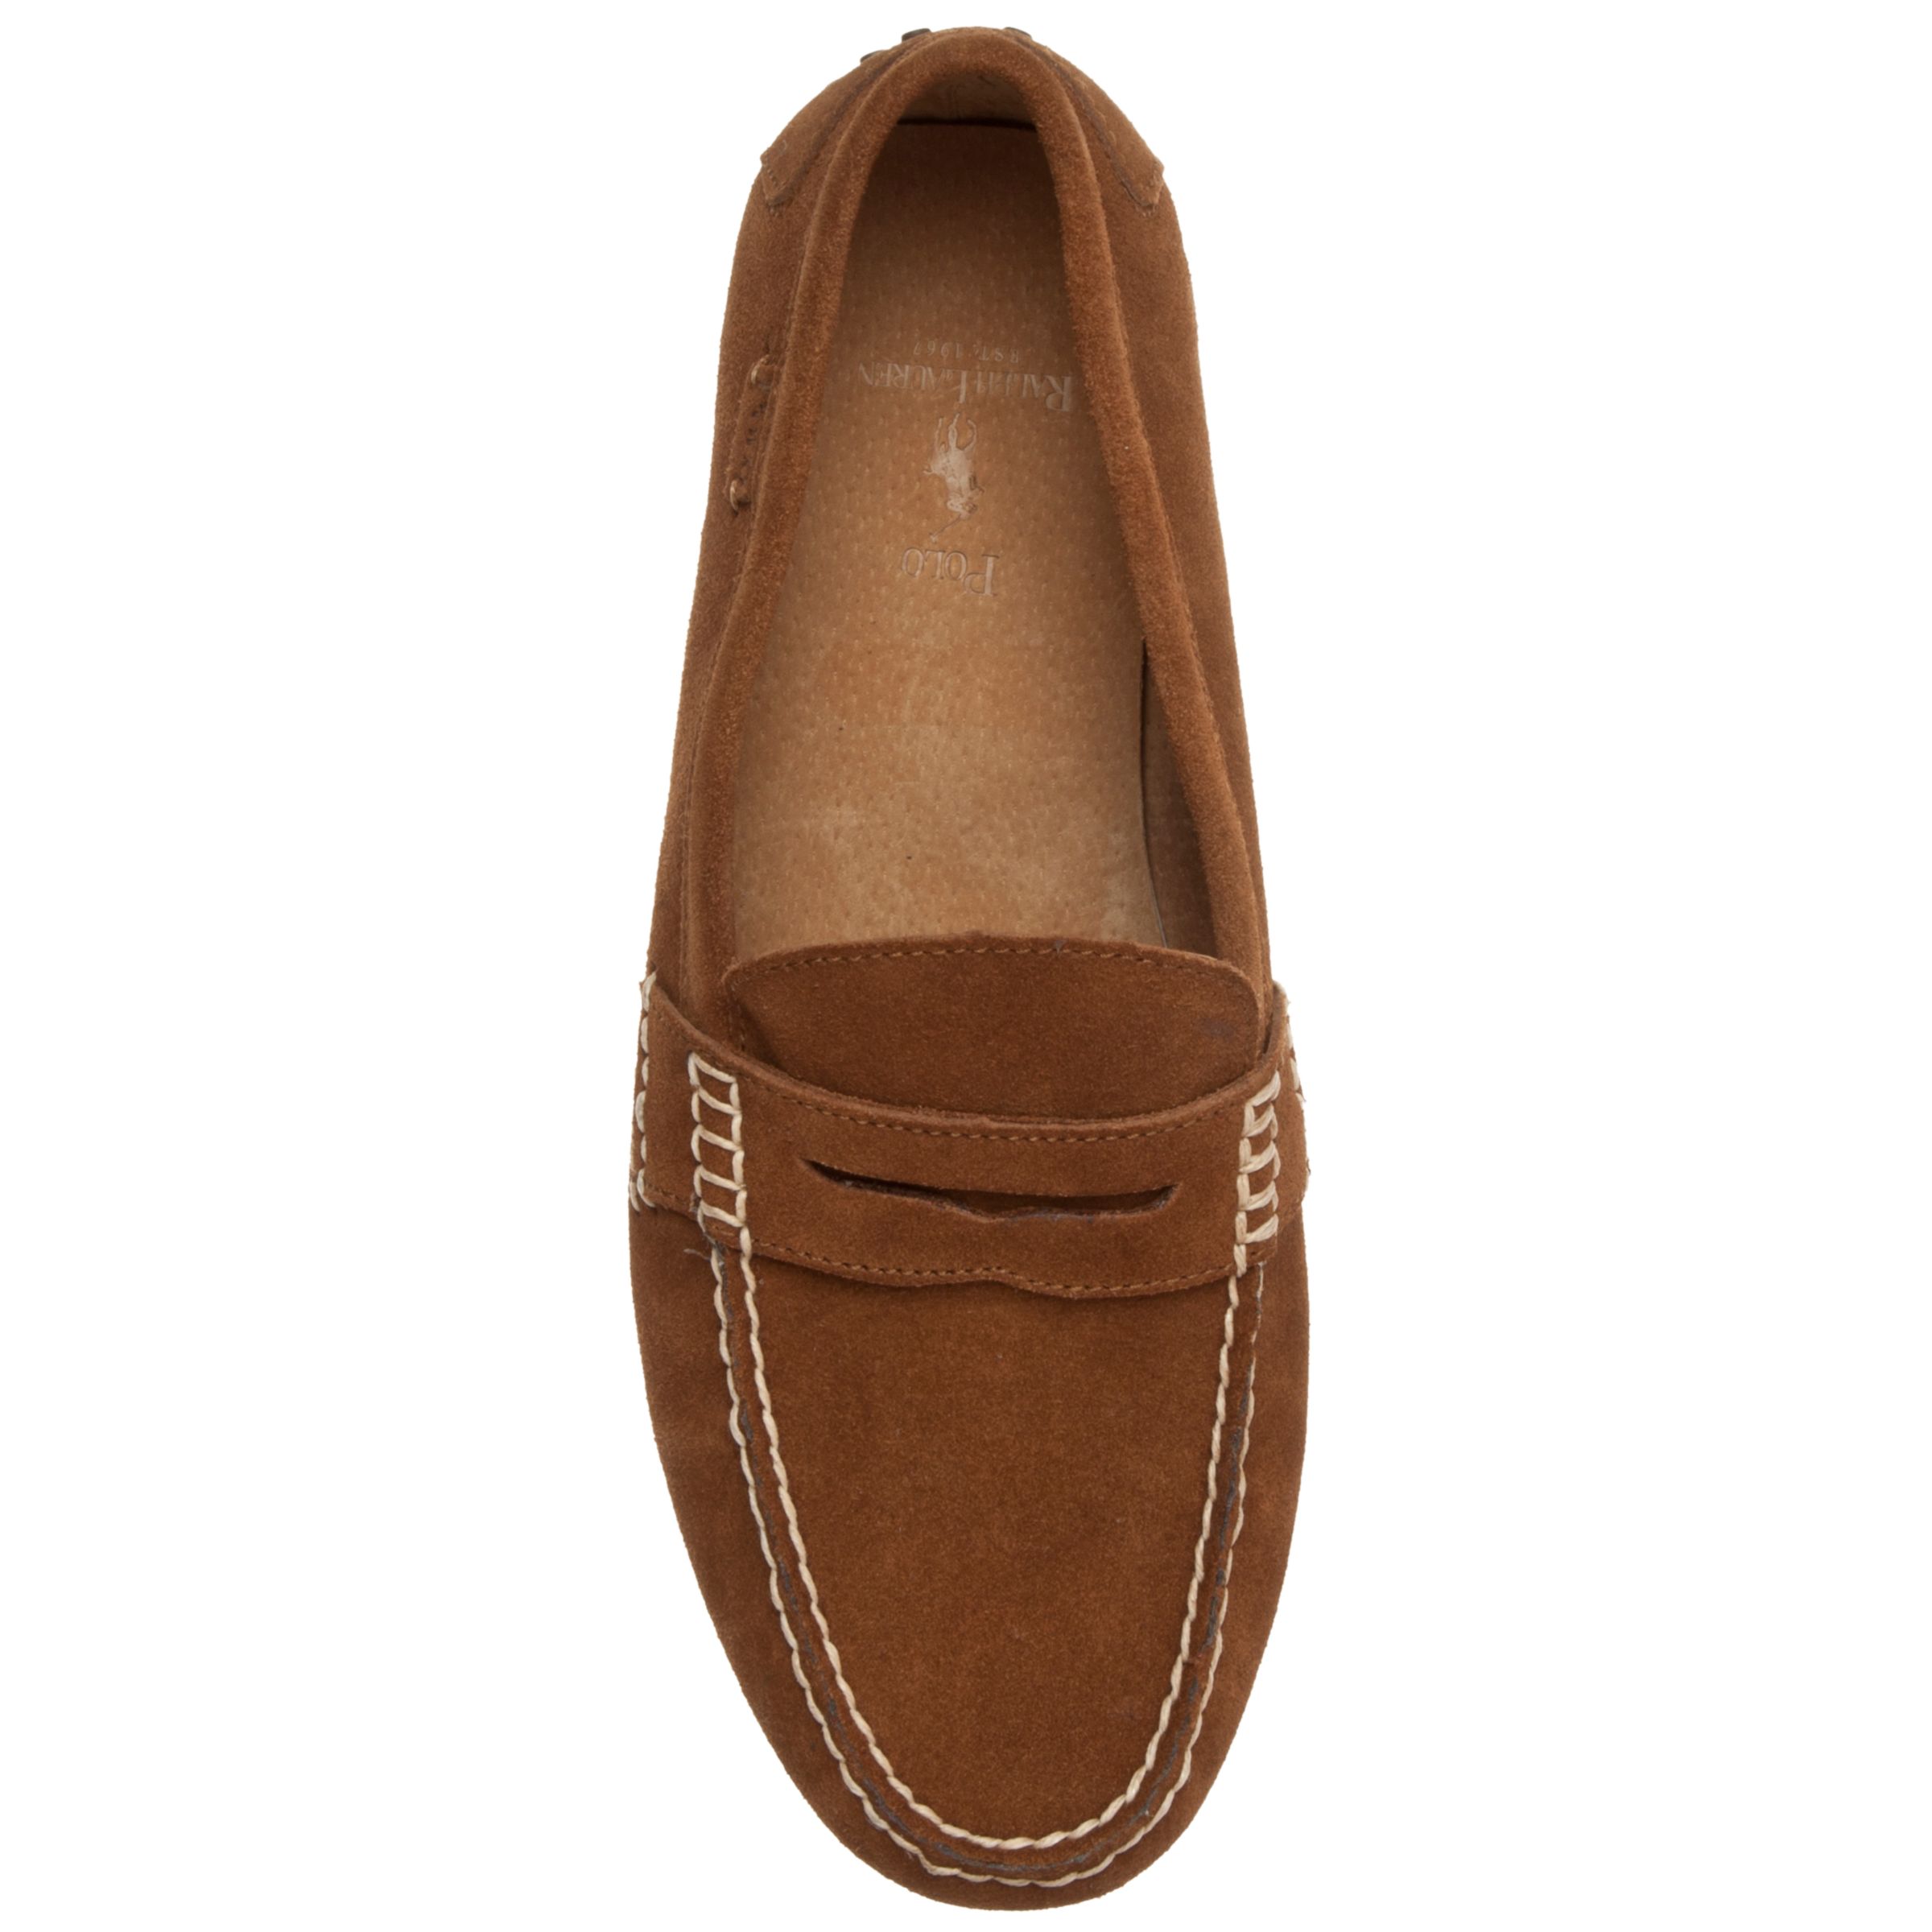 Polo Ralph Lauren Wes Suede Loafers at John Lewis & Partners